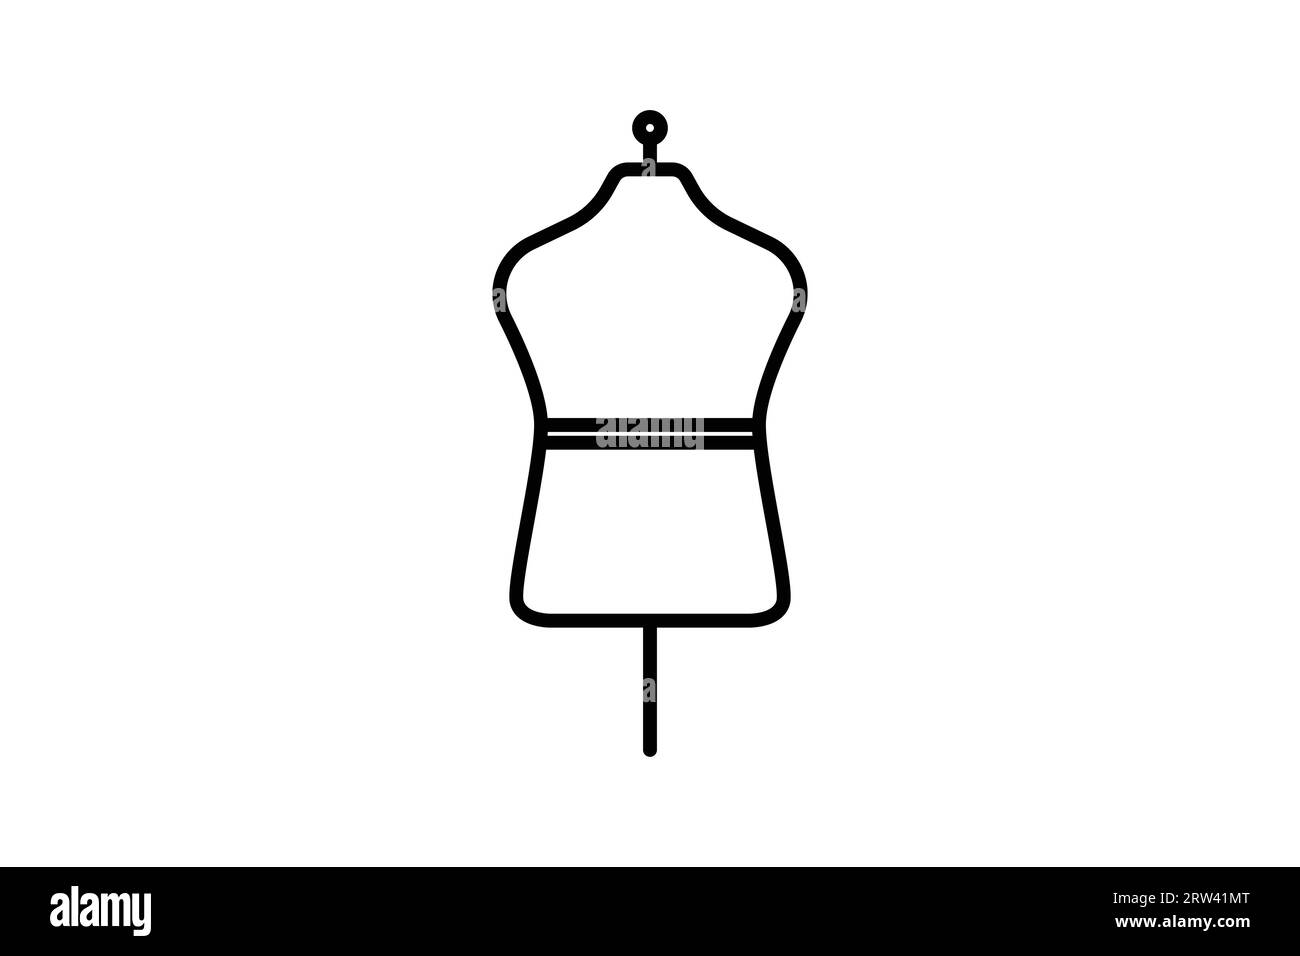 Mannequin icon. Icon related to textiles, sewing and used for displaying clothing made from textiles. Line icon style. Simple vector design editable Stock Vector